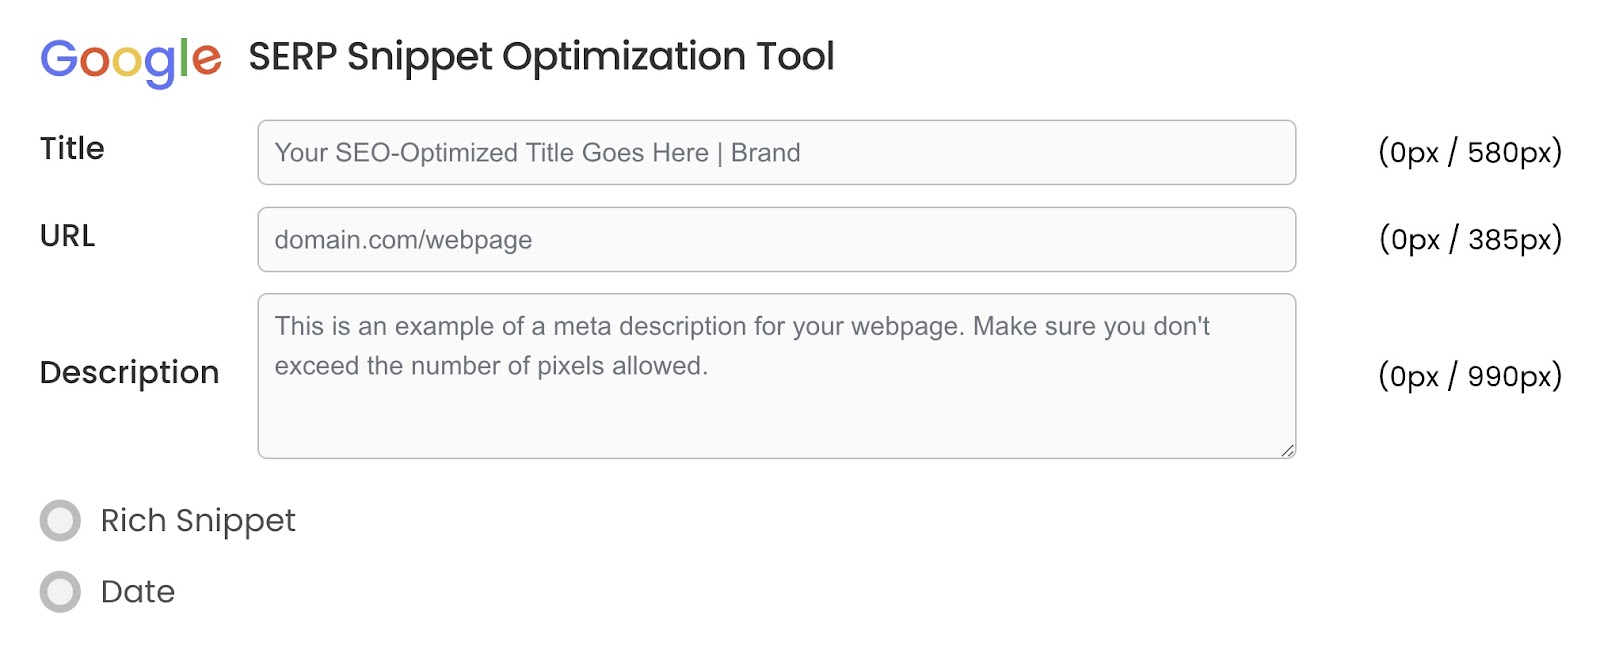 HigherVisibility’s SERP Snippet Optimization Tool